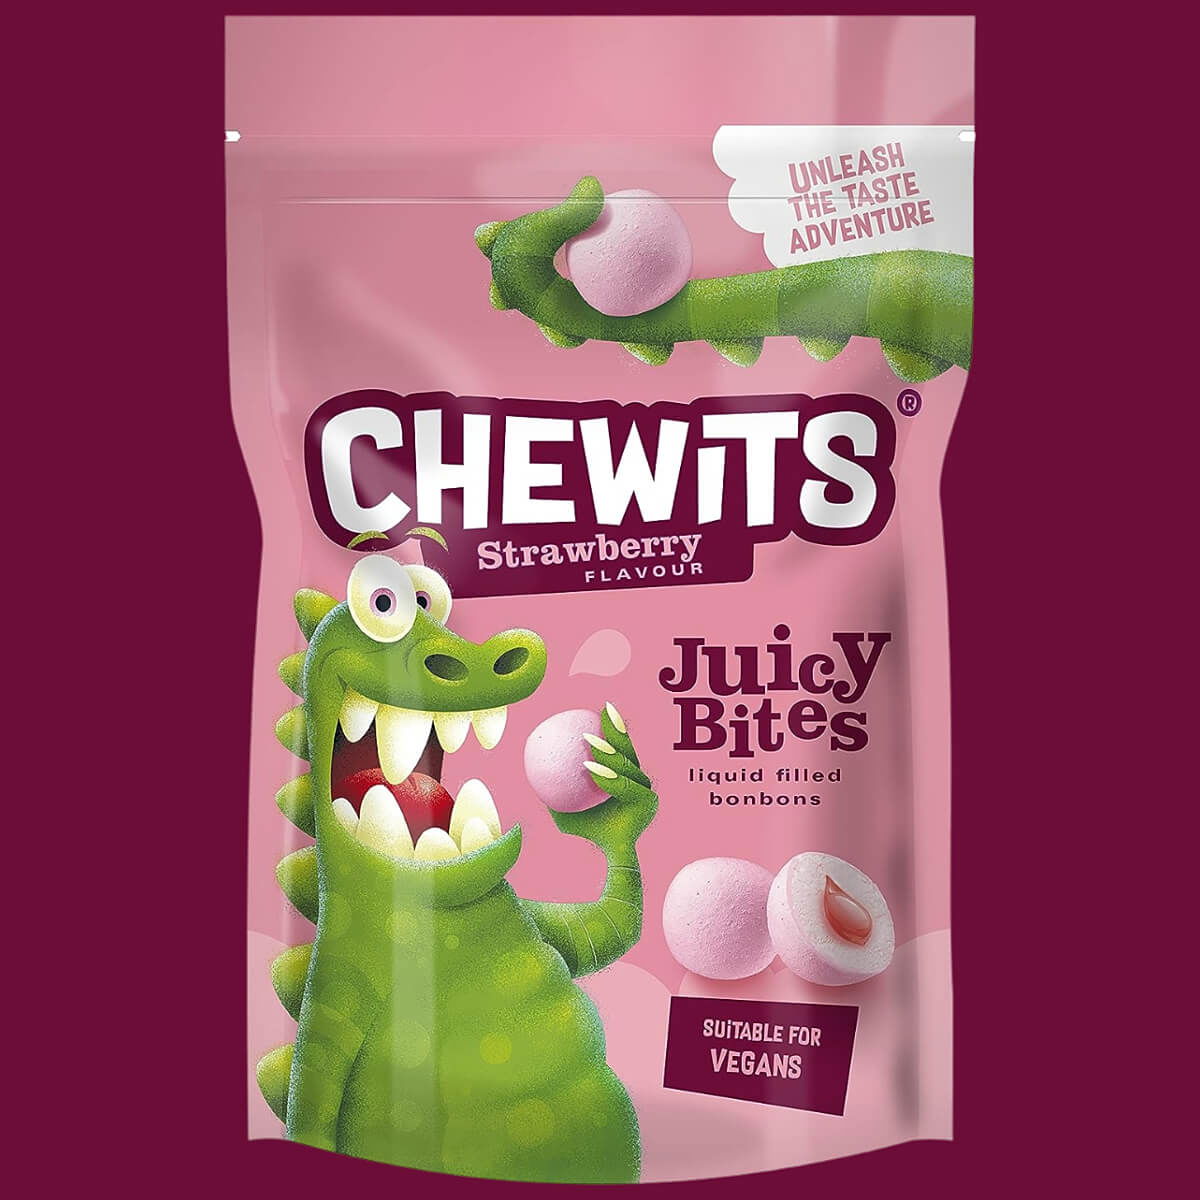 Chewits Sweets - A Tale of Dinosaurs and Ice Cream!